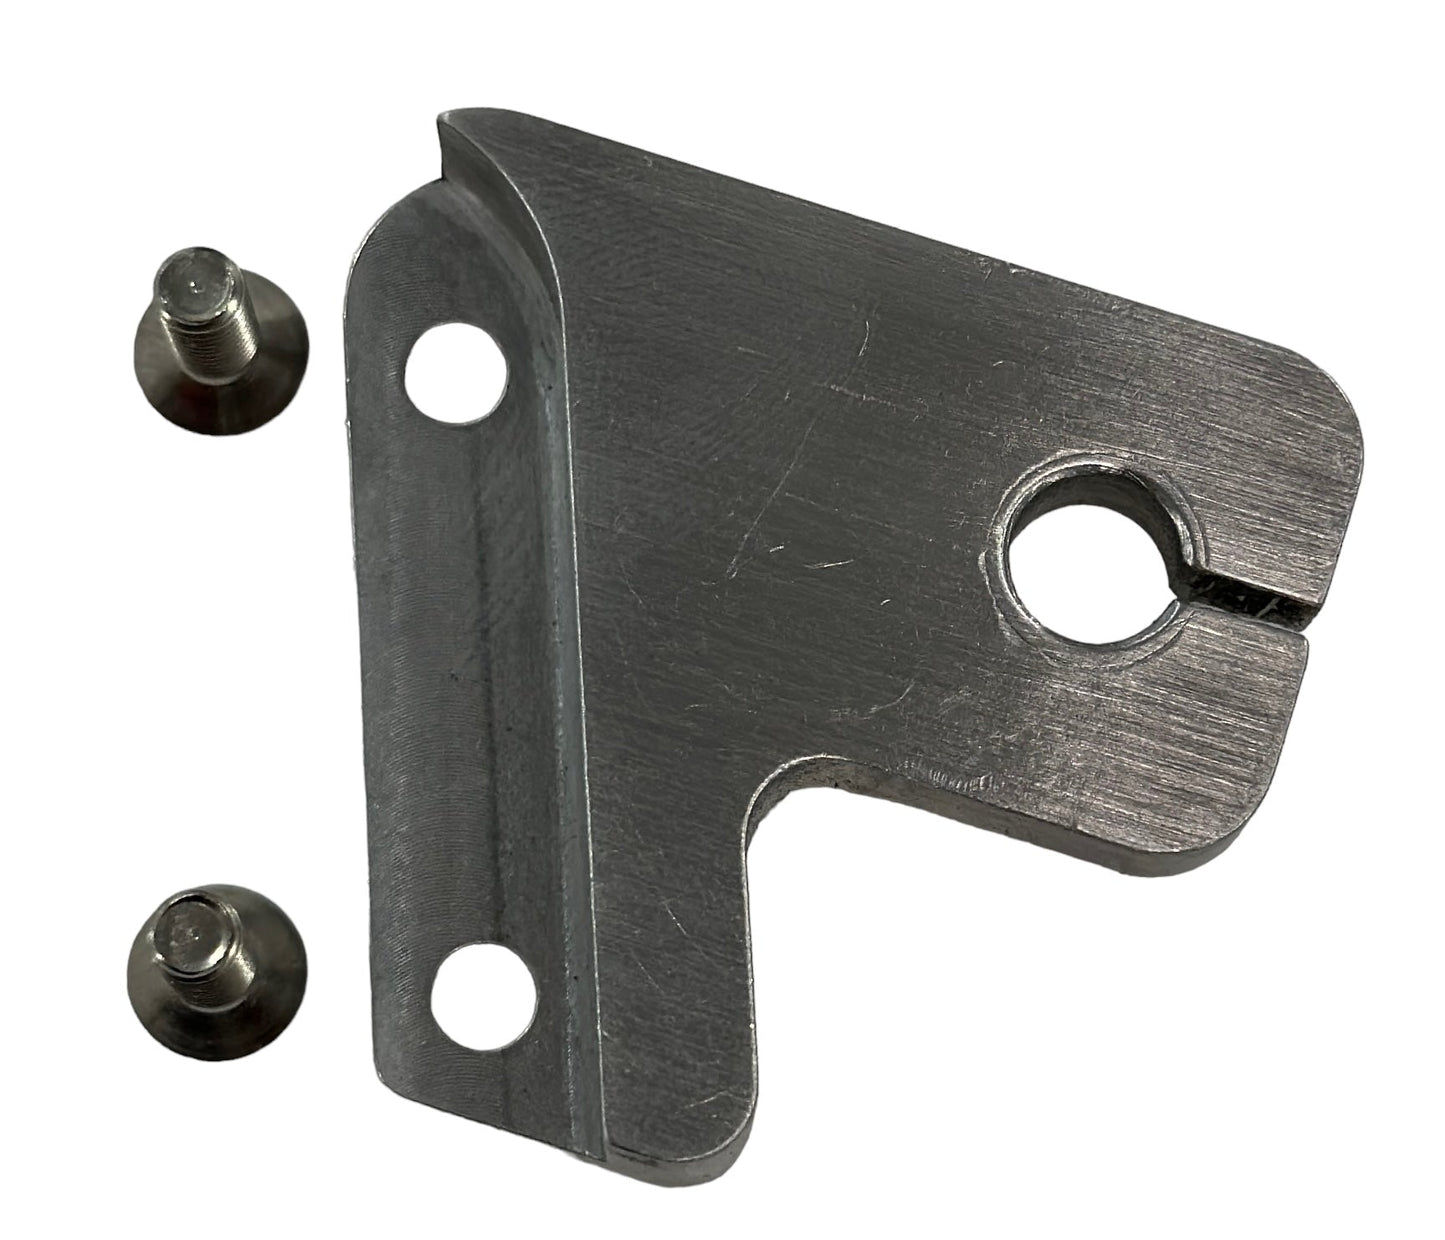 Replacement Throttle Bracket for PHP Intake Manifold